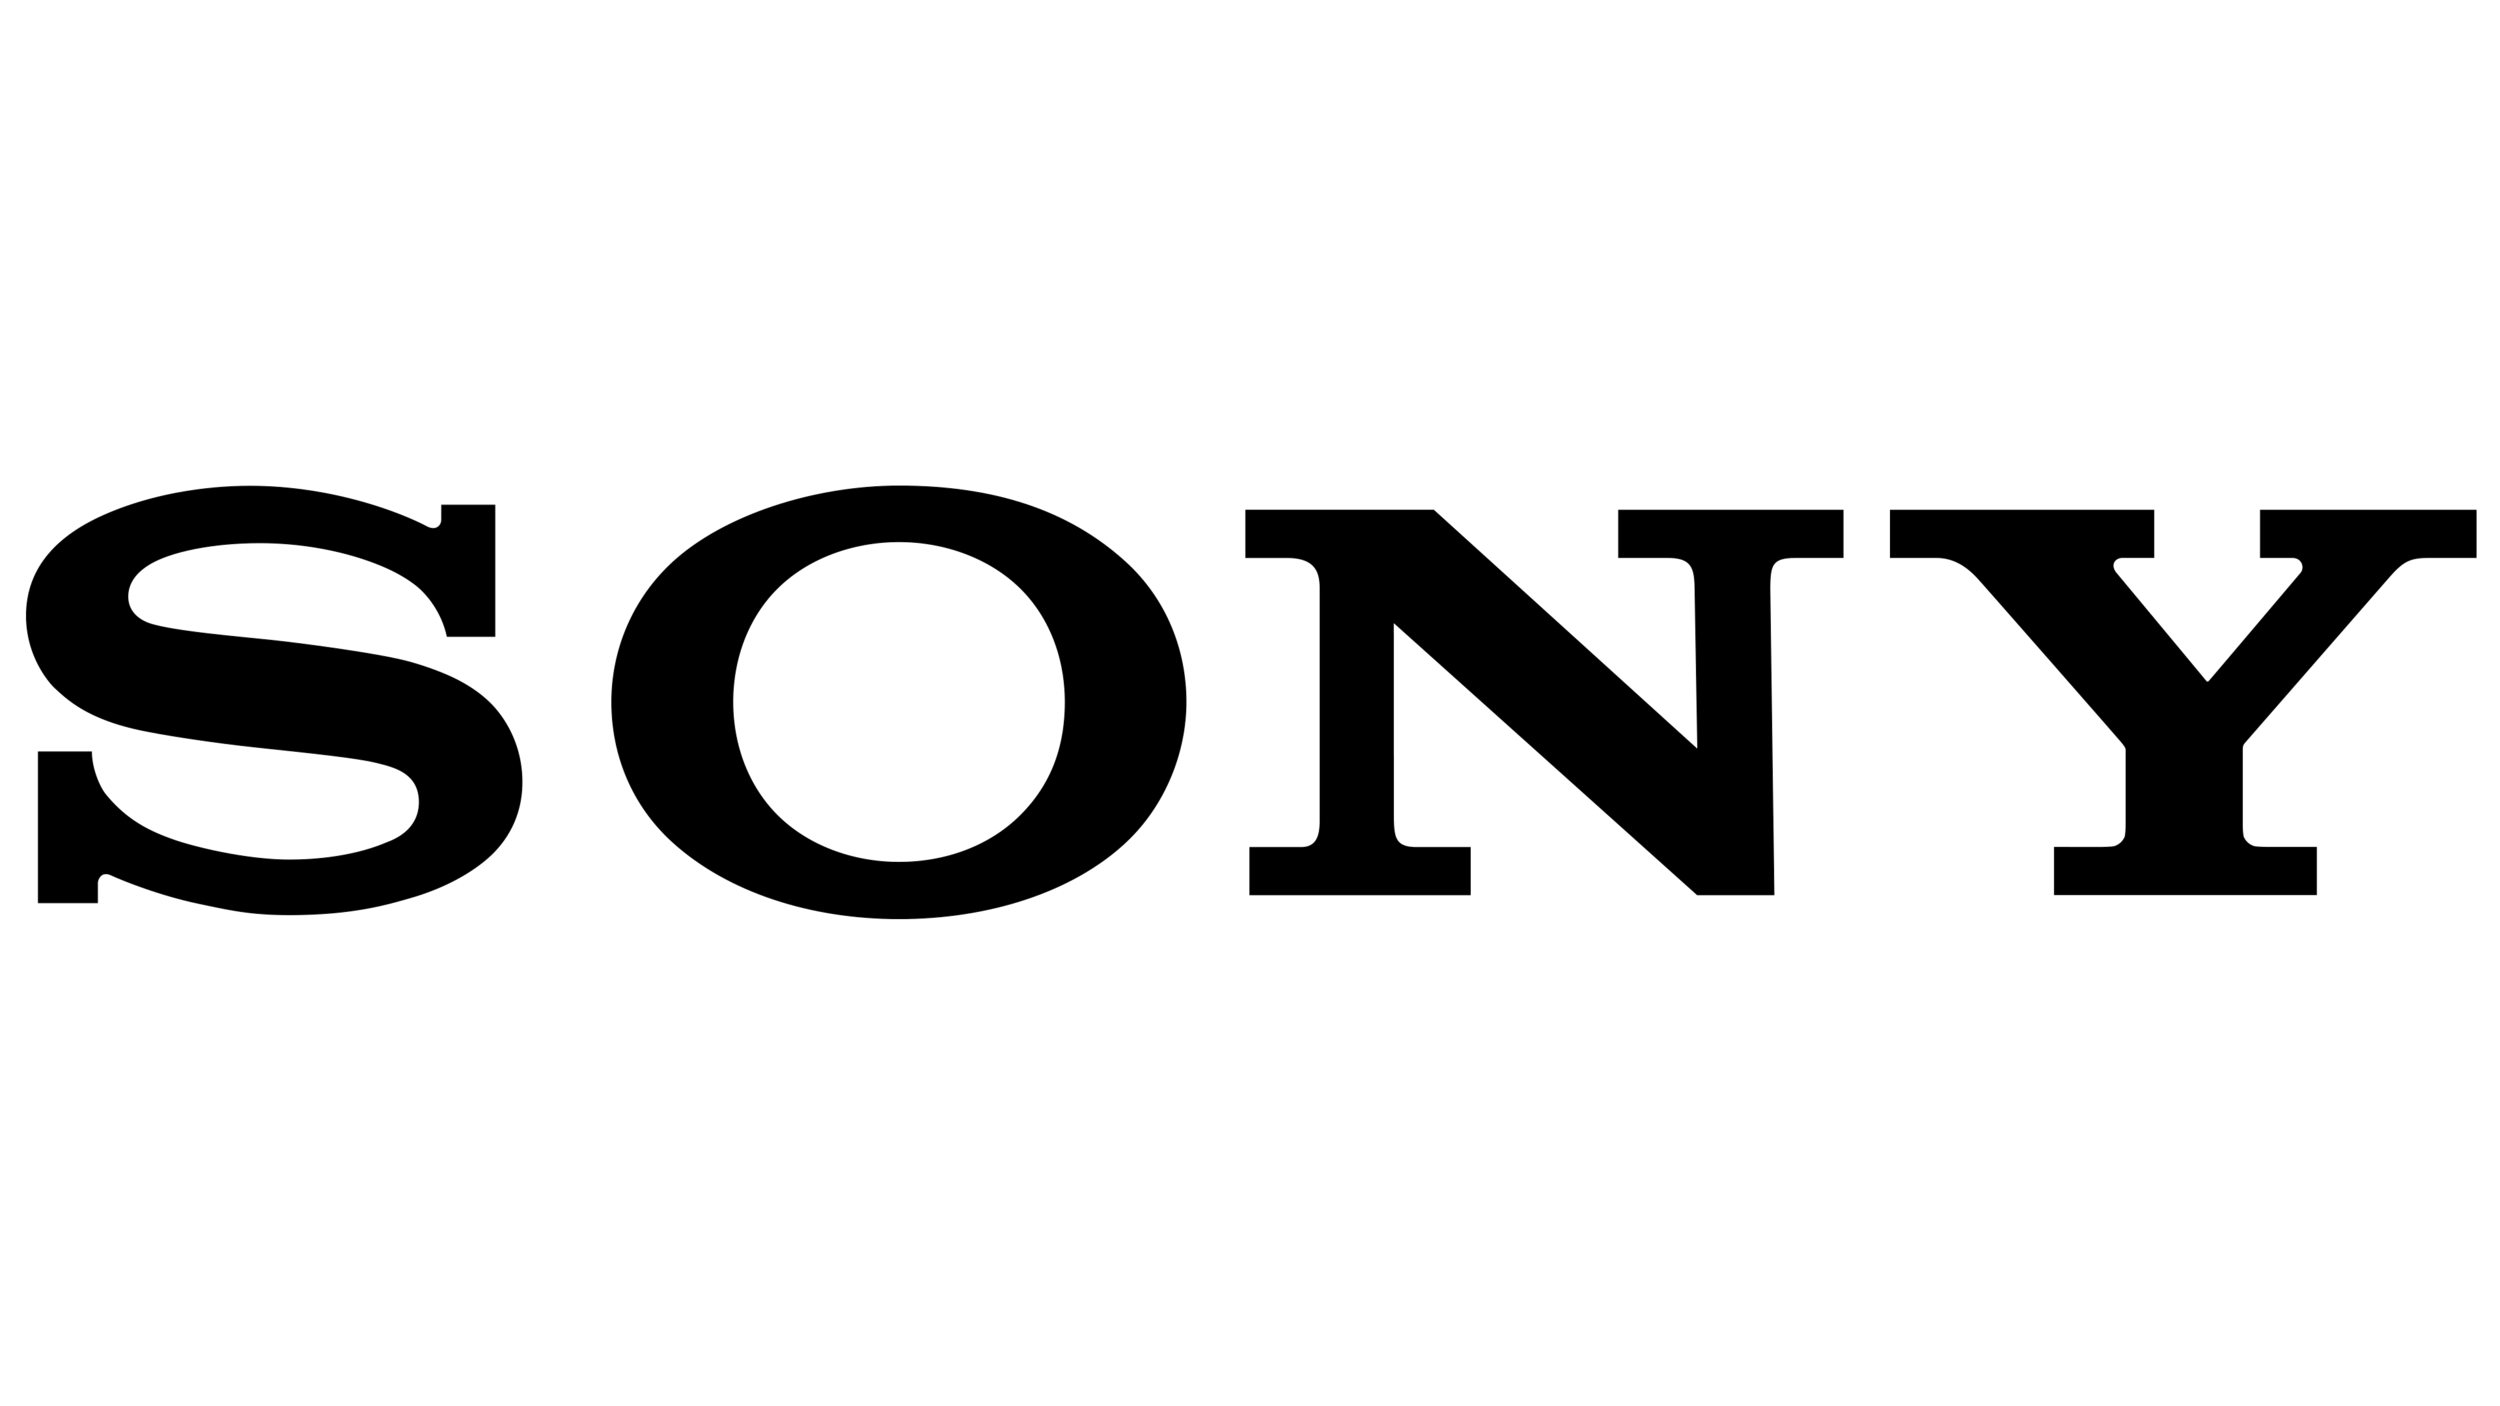 Sony-Logo.png